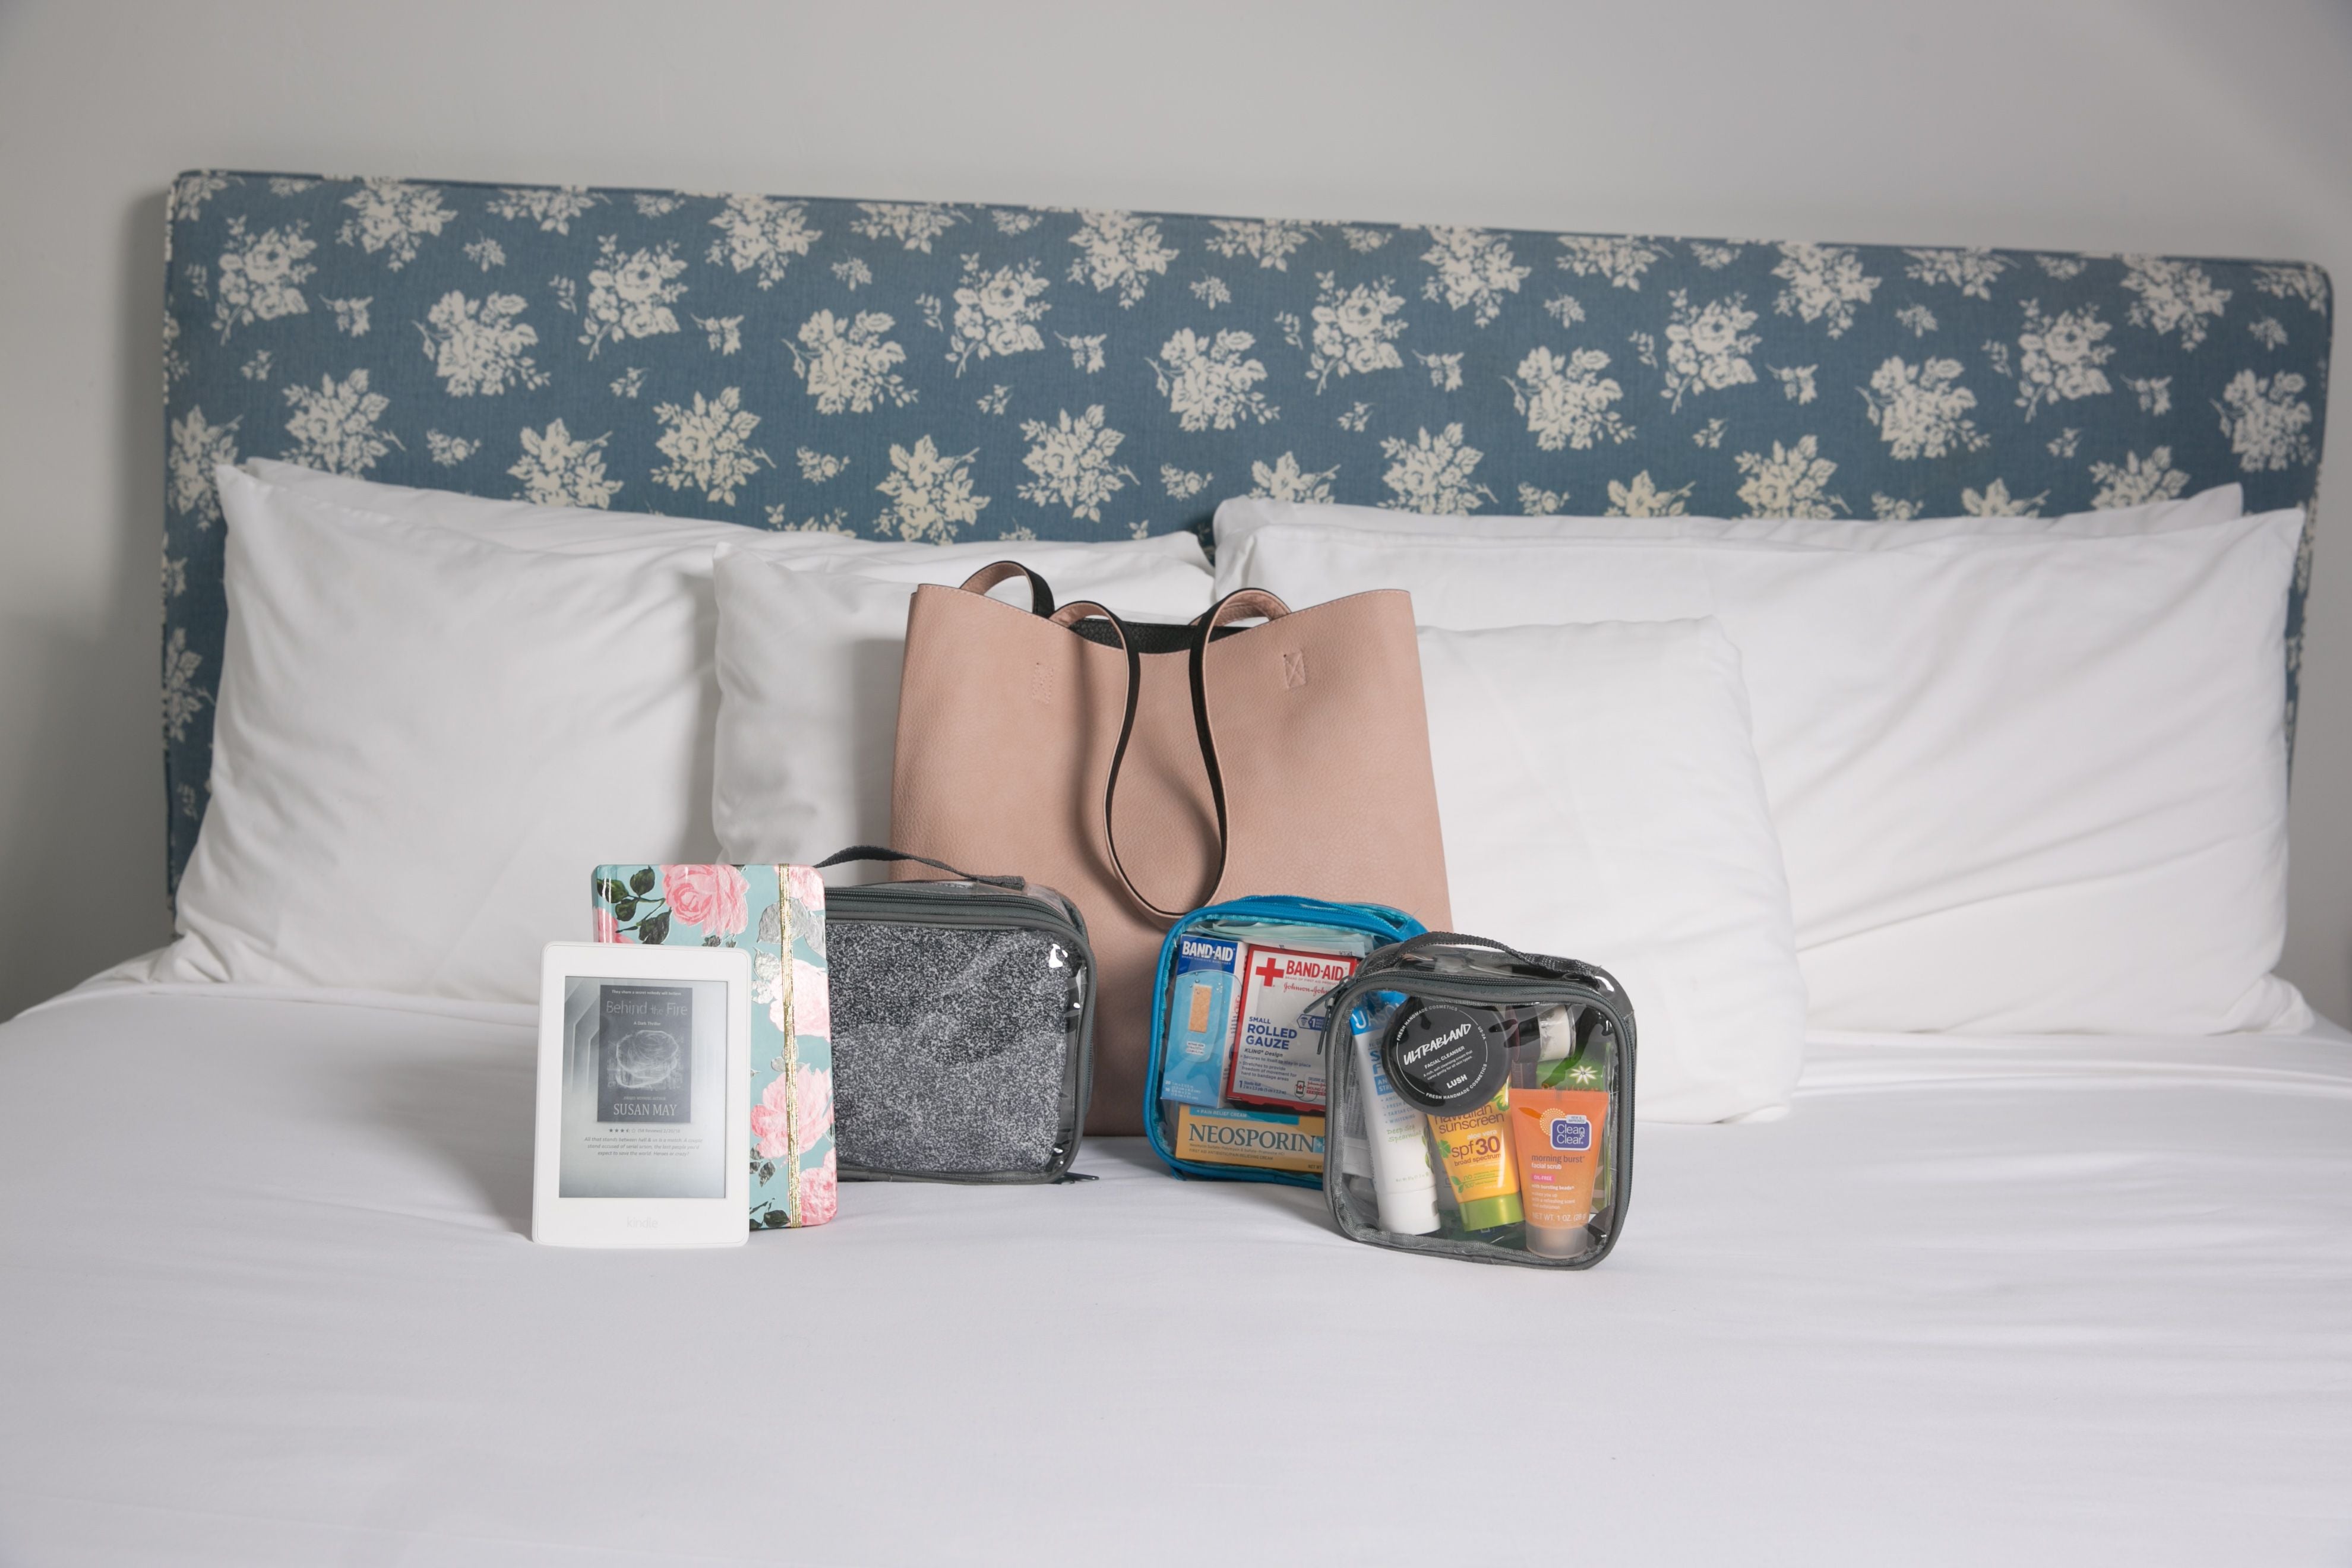 Tote bag and overnight trip essentials in clear packing cubes